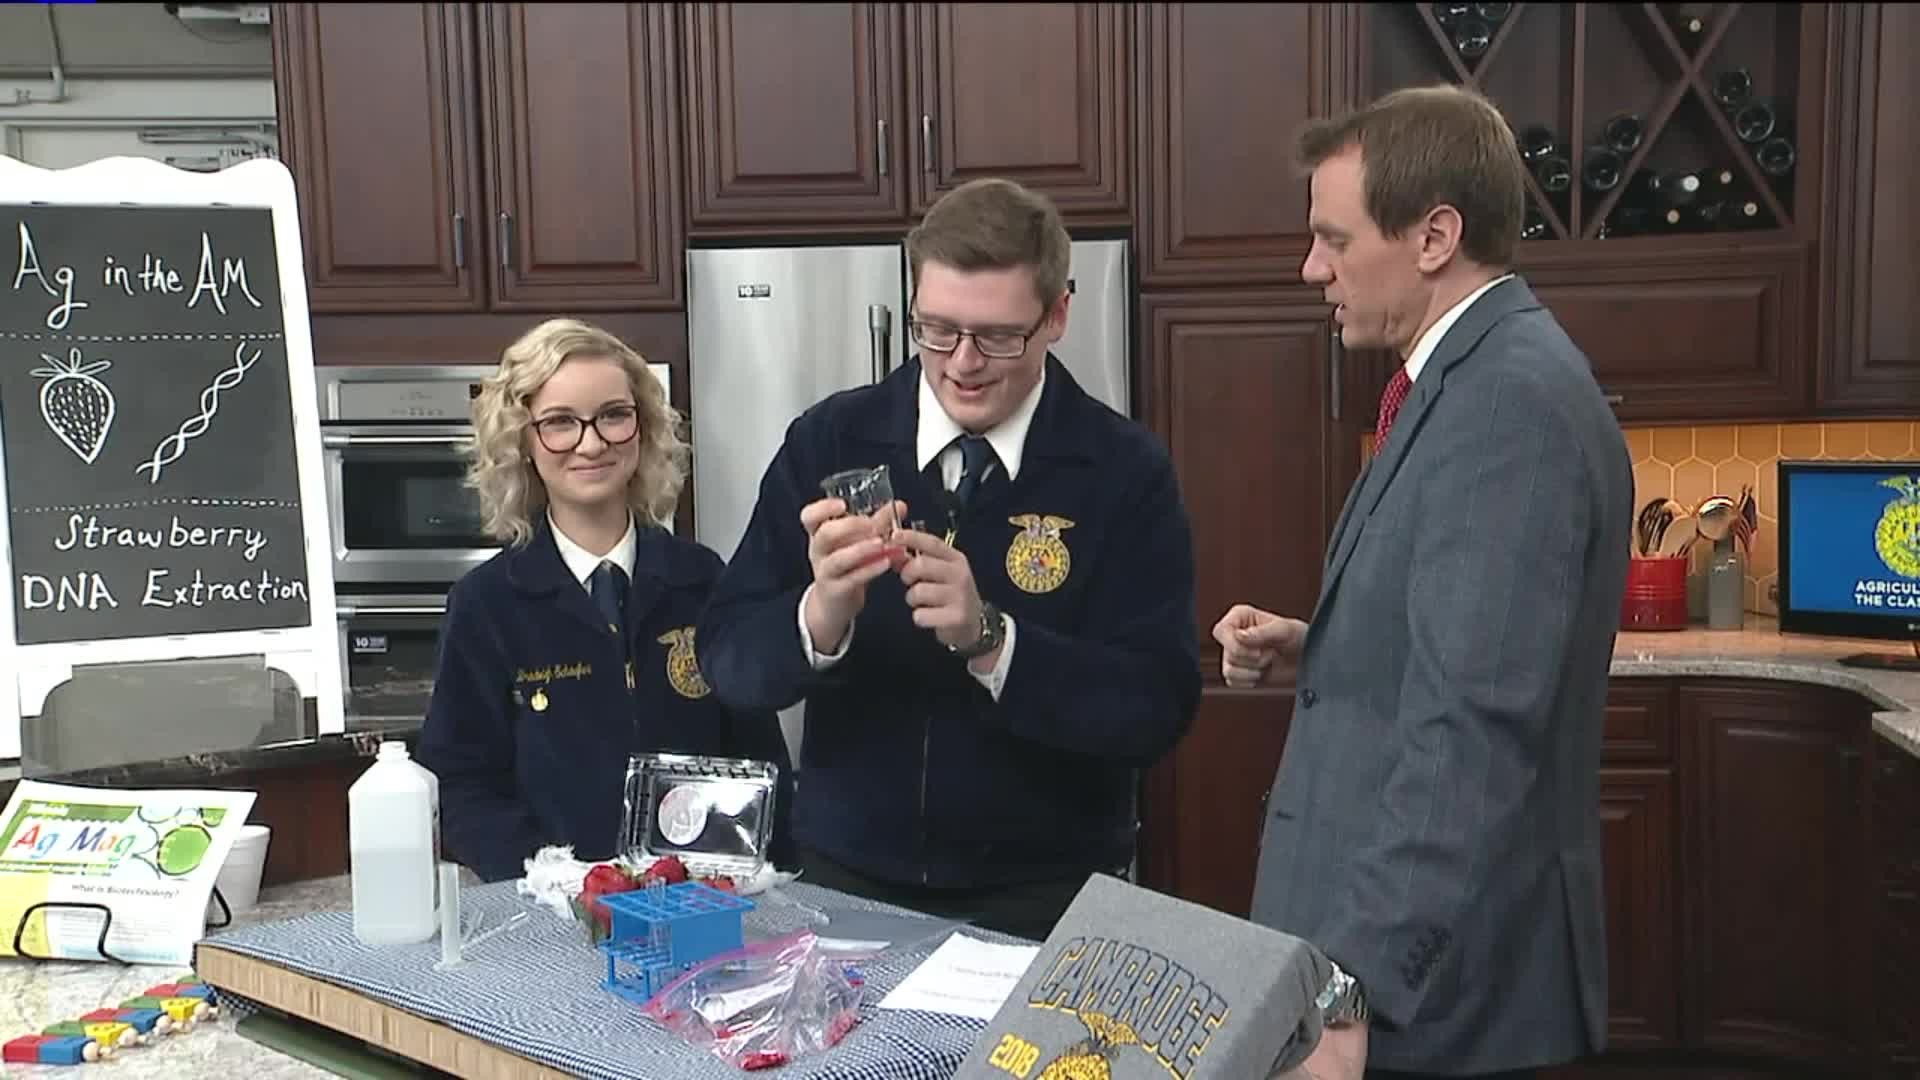 Ag in the Classroom: Extracting DNA from Strawberries